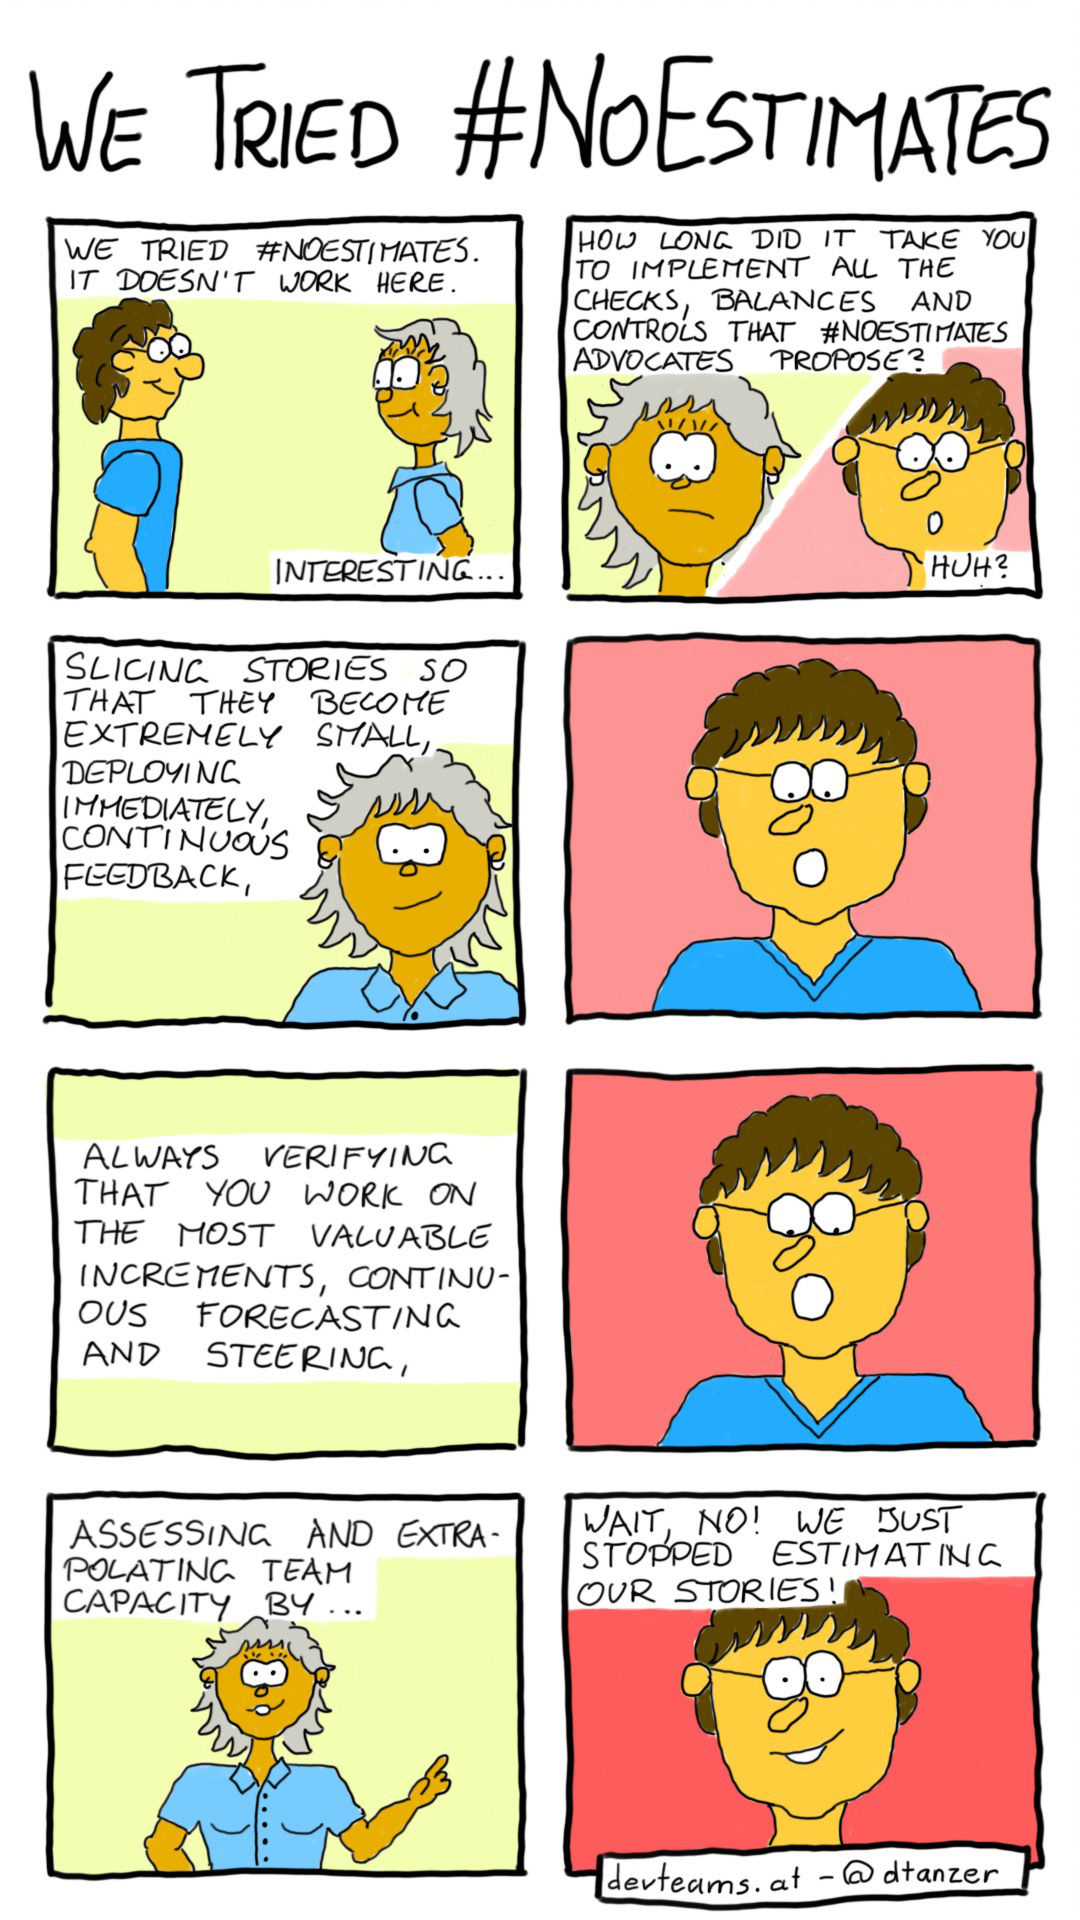 Comic about a company that says it tried NoEstimates, but really didn't. Transcript below.